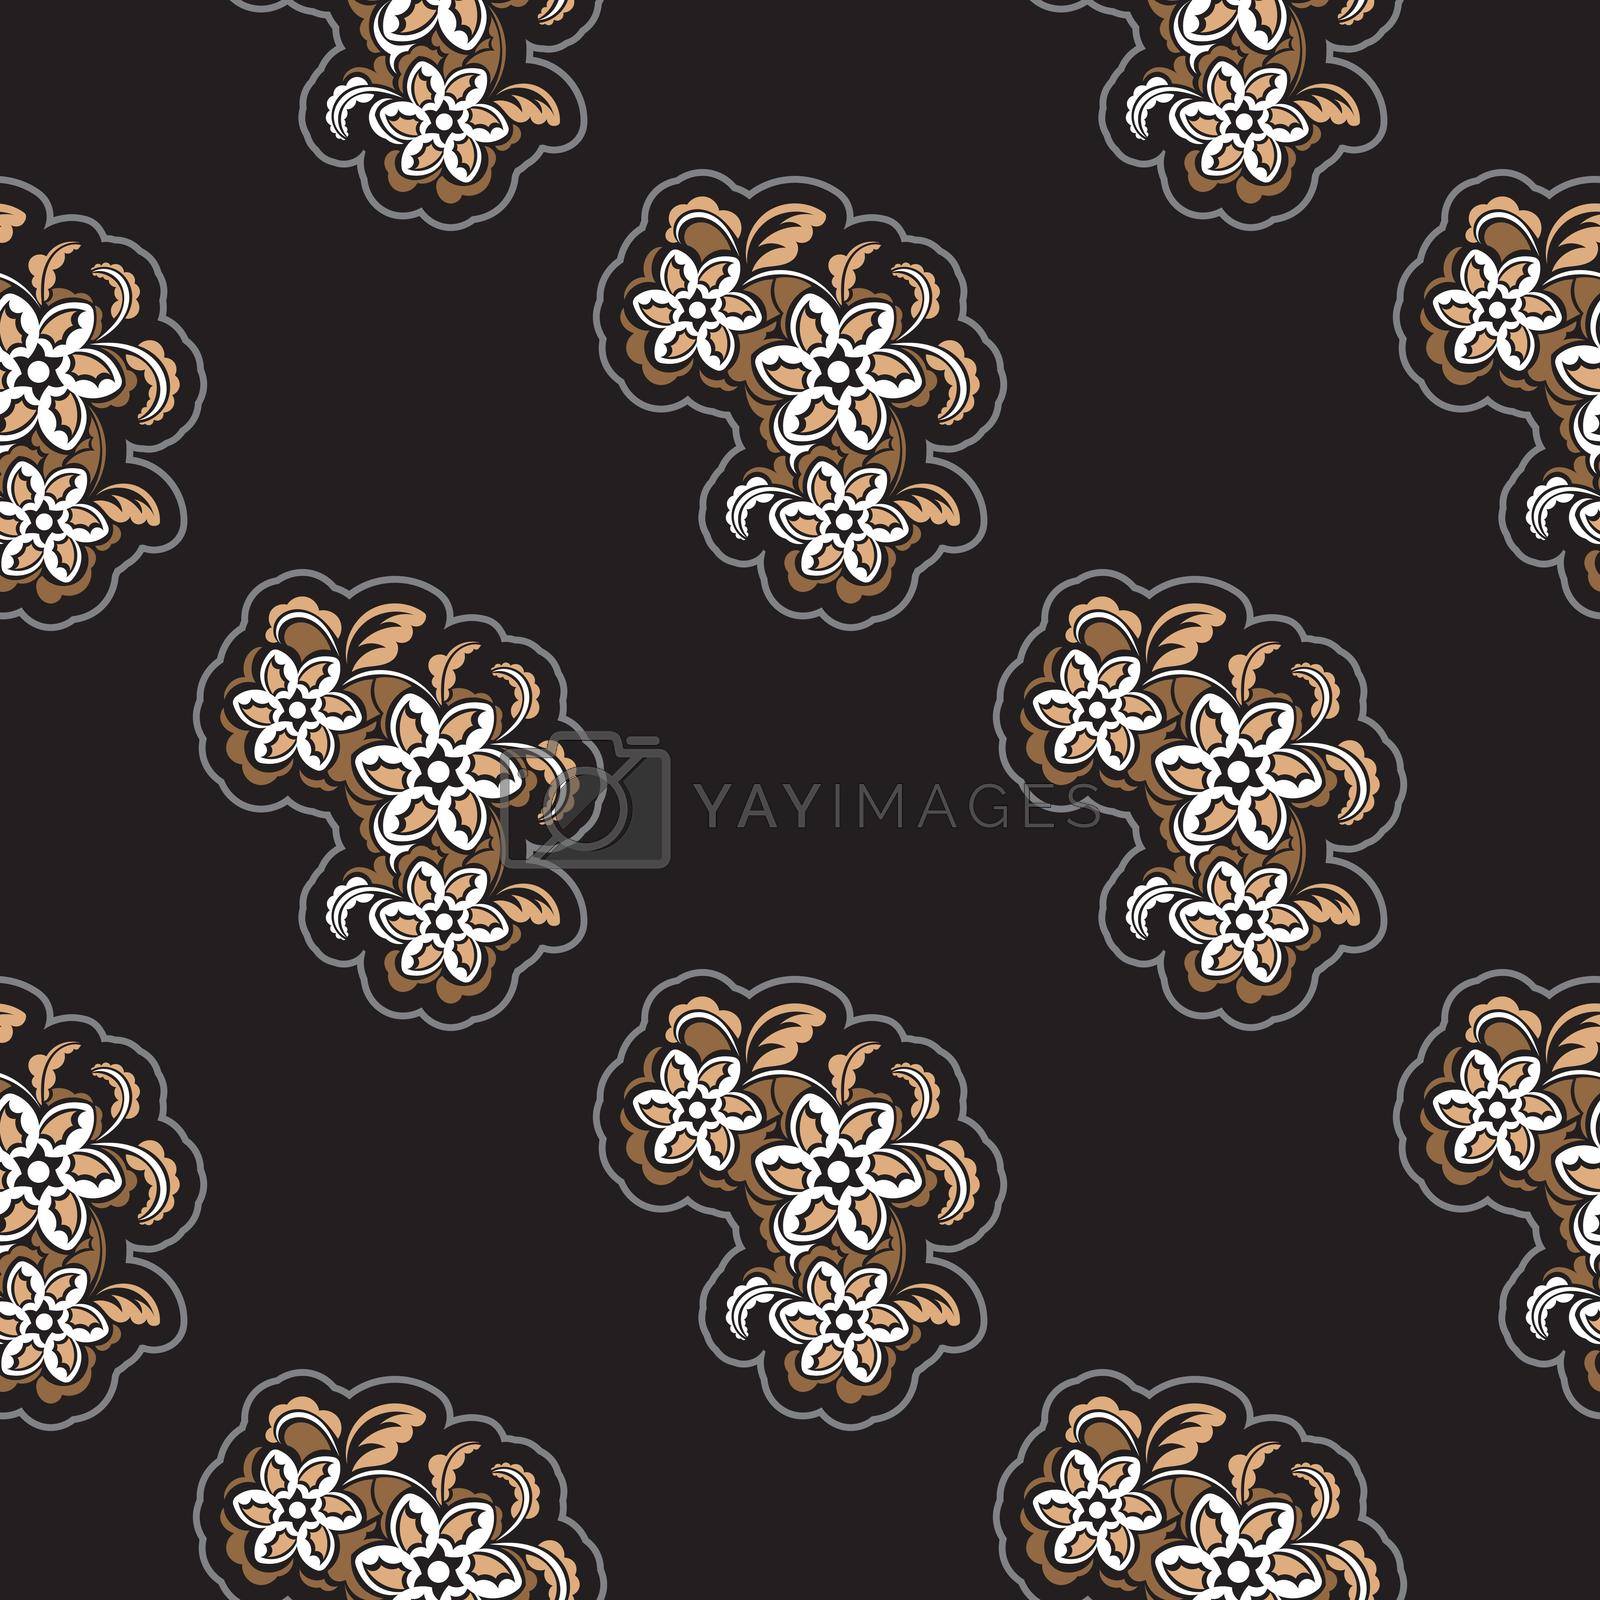 Seamless pattern with antique style ornament. Good for backgrounds and prints. Vector illustration